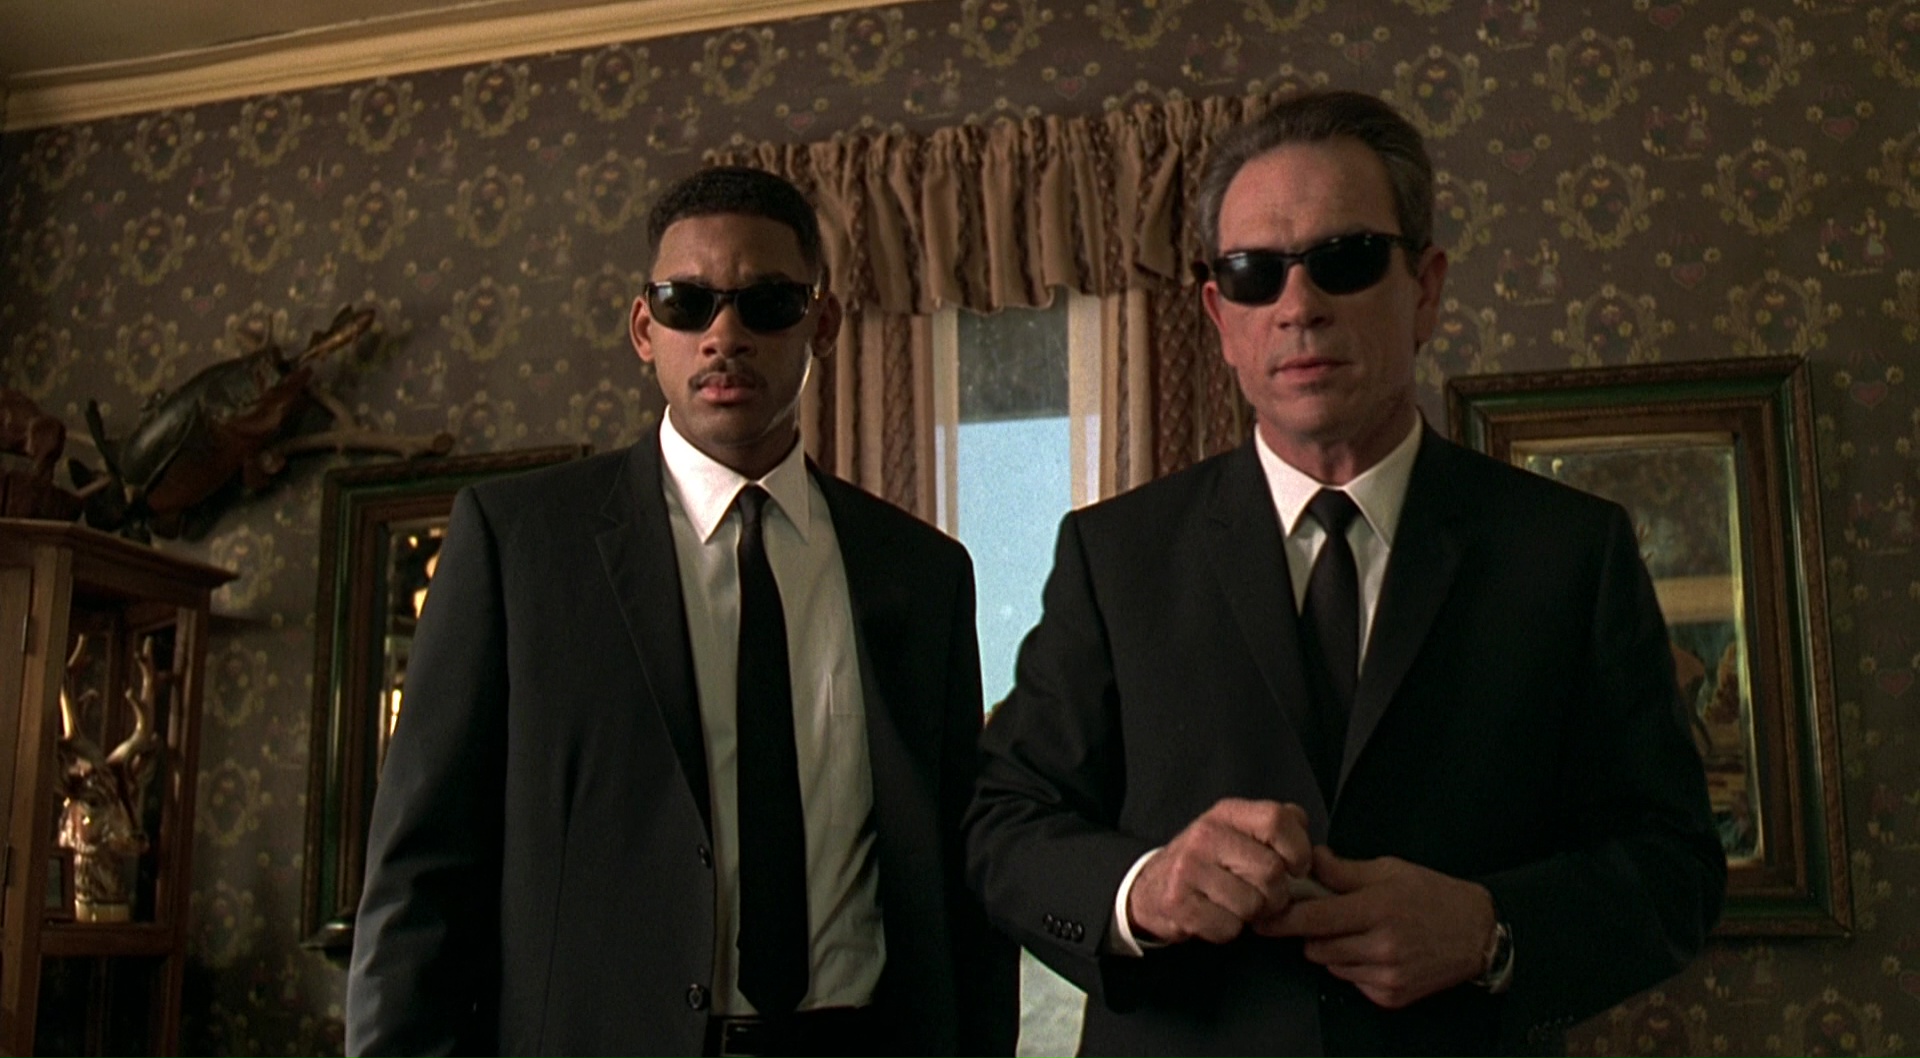 Ray Ban Sunglasses Worn By Will Smith And Ray Ban 30 Predator Sunglasses Worn By Tommy Lee Jones In Men In Black 1997